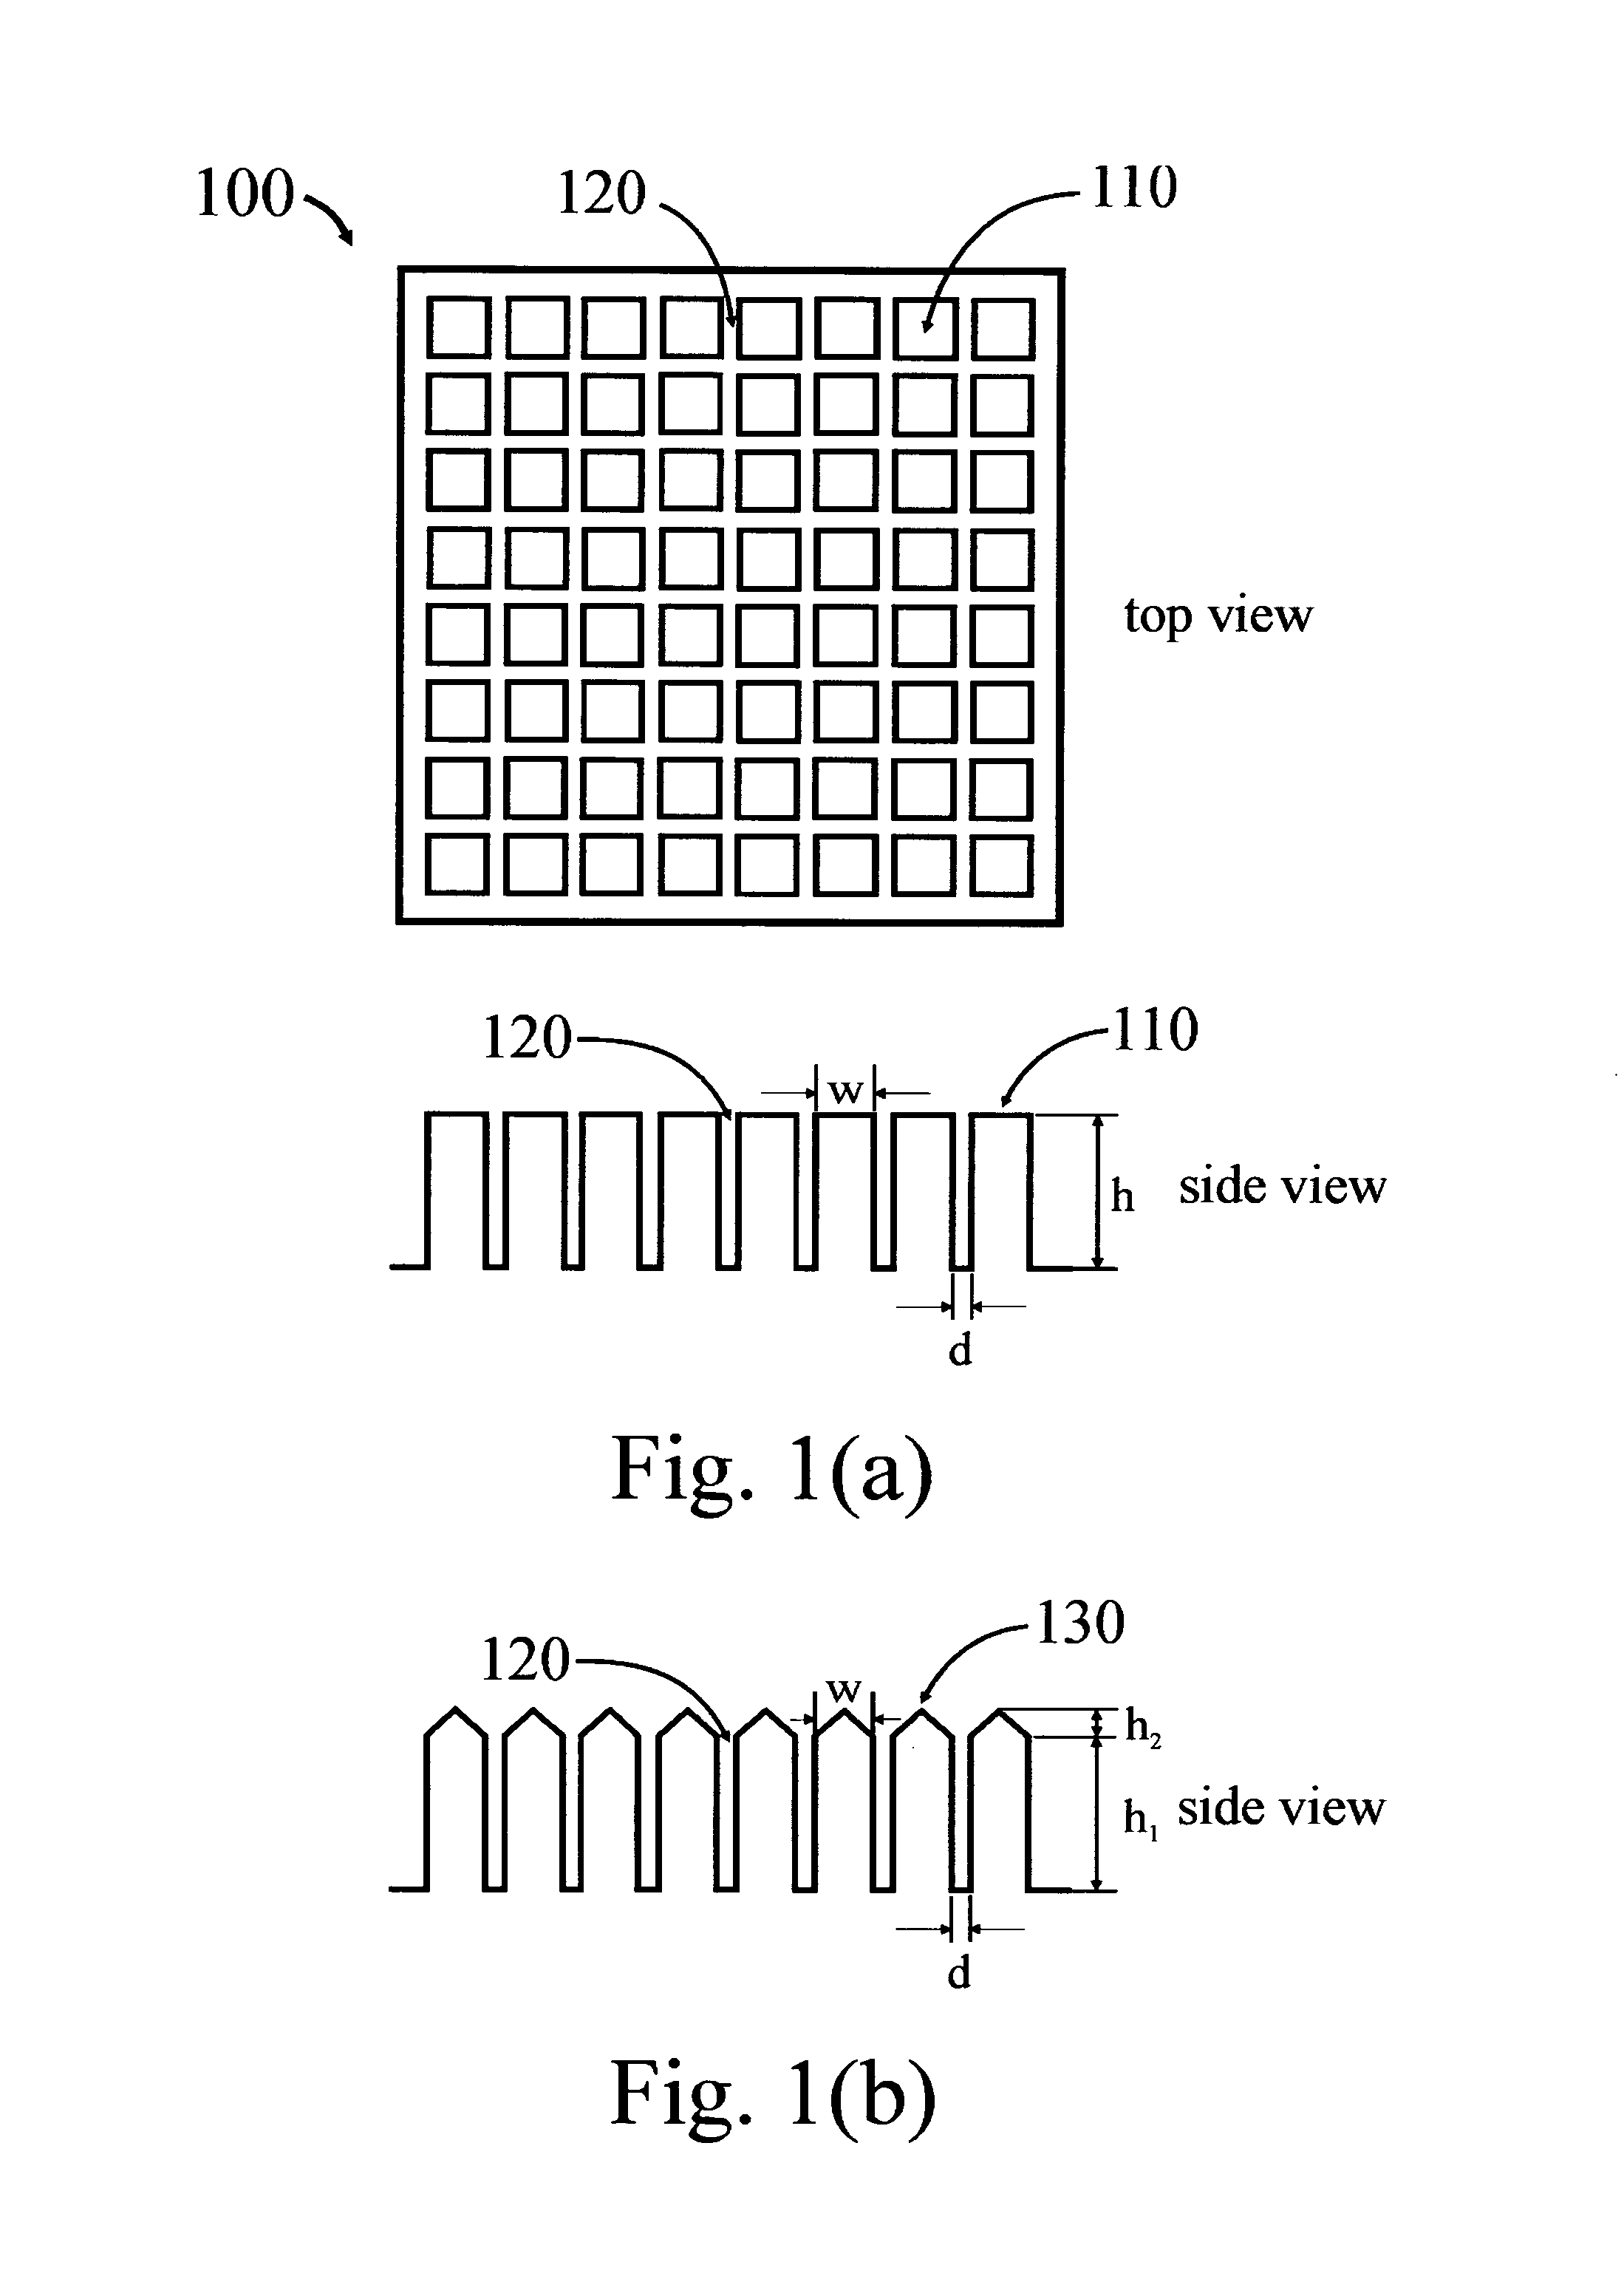 Dislocation and stress management by mask-less processes using substrate patterning and methods for device fabrication